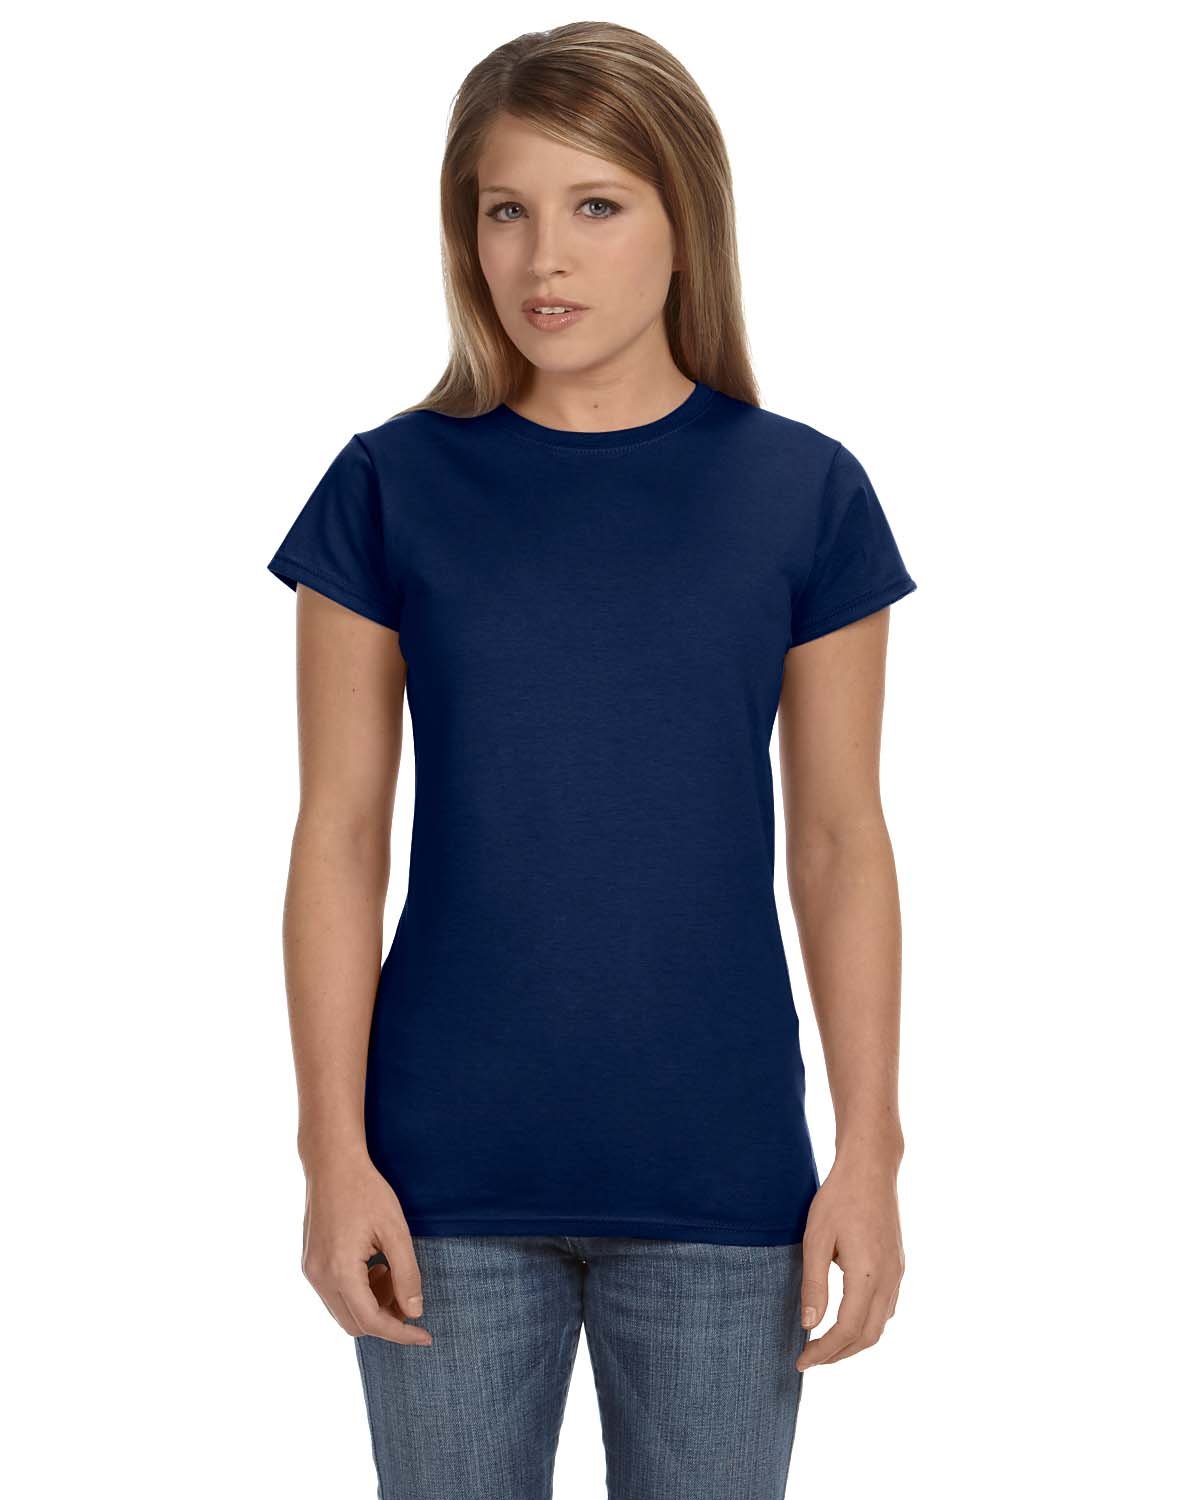 Gildan Ladies' Softstyle® Fitted T-Shirt NAVY 